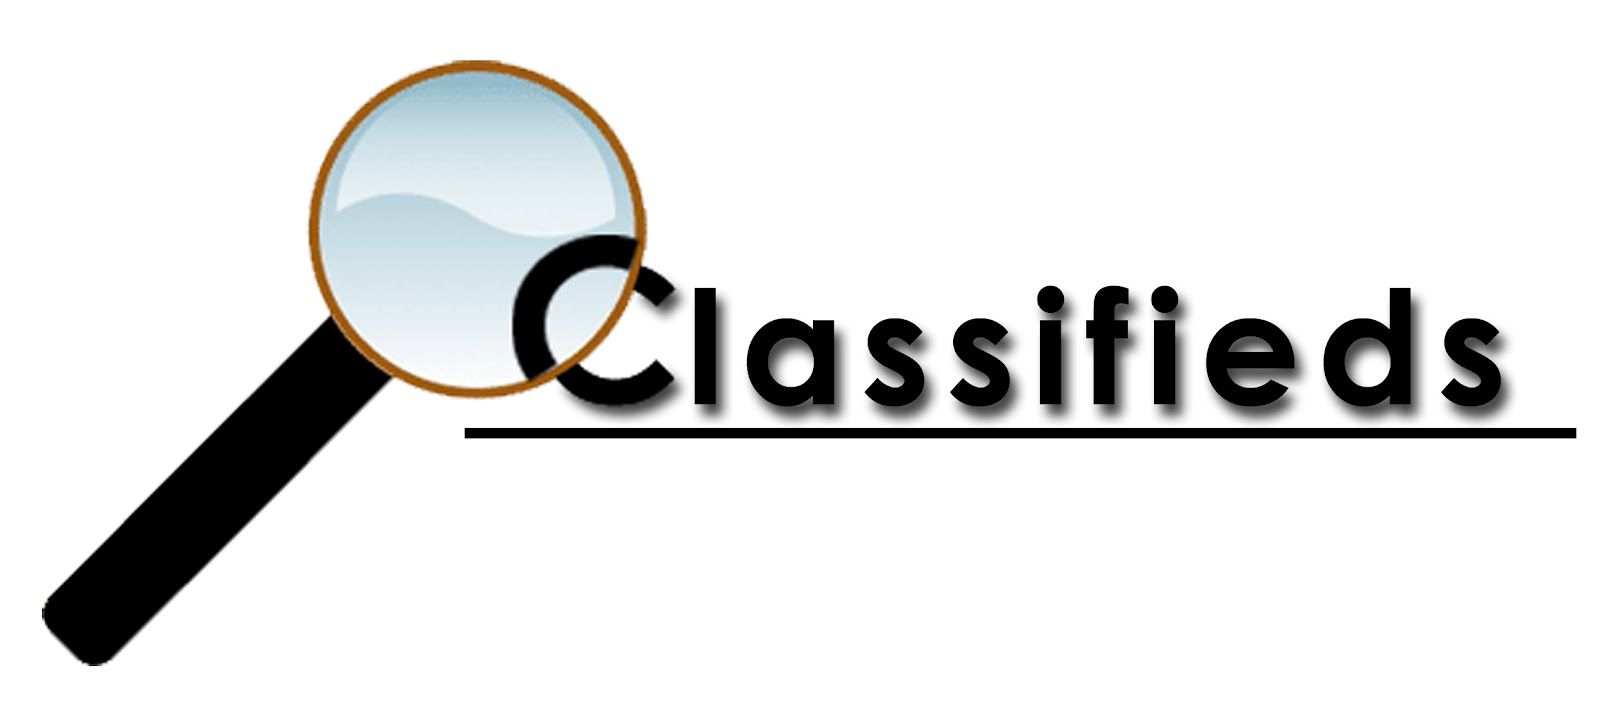 classified posting sites in india Searches related to classified posting sites in india free classifieds ad posting sites in india classified posting sites list free classified sites list in india free classified websites list for ad posting free ad posting sites list without registration free indian classified websites list without registration for ad posting free ad posting sites list in india 1000 free classified sites without registration dofollow classified sites list india do follow classified sites dofollow classified sites list 2014 dofollow classified sites list 2015 free classified submission sites list in india free classified submission sites list in india with high pr free classified submission sites list without registration classified submission sites list 2015 Advantages of Free Ad Posting Sites List without Registration High PR Do Follow Classified Posting Sites List for India Here is the List of High PR Do Follow Classified Posting Sites for India Free High PR Do Follow Classified Submission Sites List 2016 - 2015 Advantages of Free Ad Posting Sites List without Registration No Follow Classified Posting Submission Sites 150+ High PR Do Follow Classified Posting Sites List for India Get 150+ Free High PR Do Follow Indian Classified Websites List 2016. Post Classified Ads Without Registration by our Free Classified Ad Submission Sites.